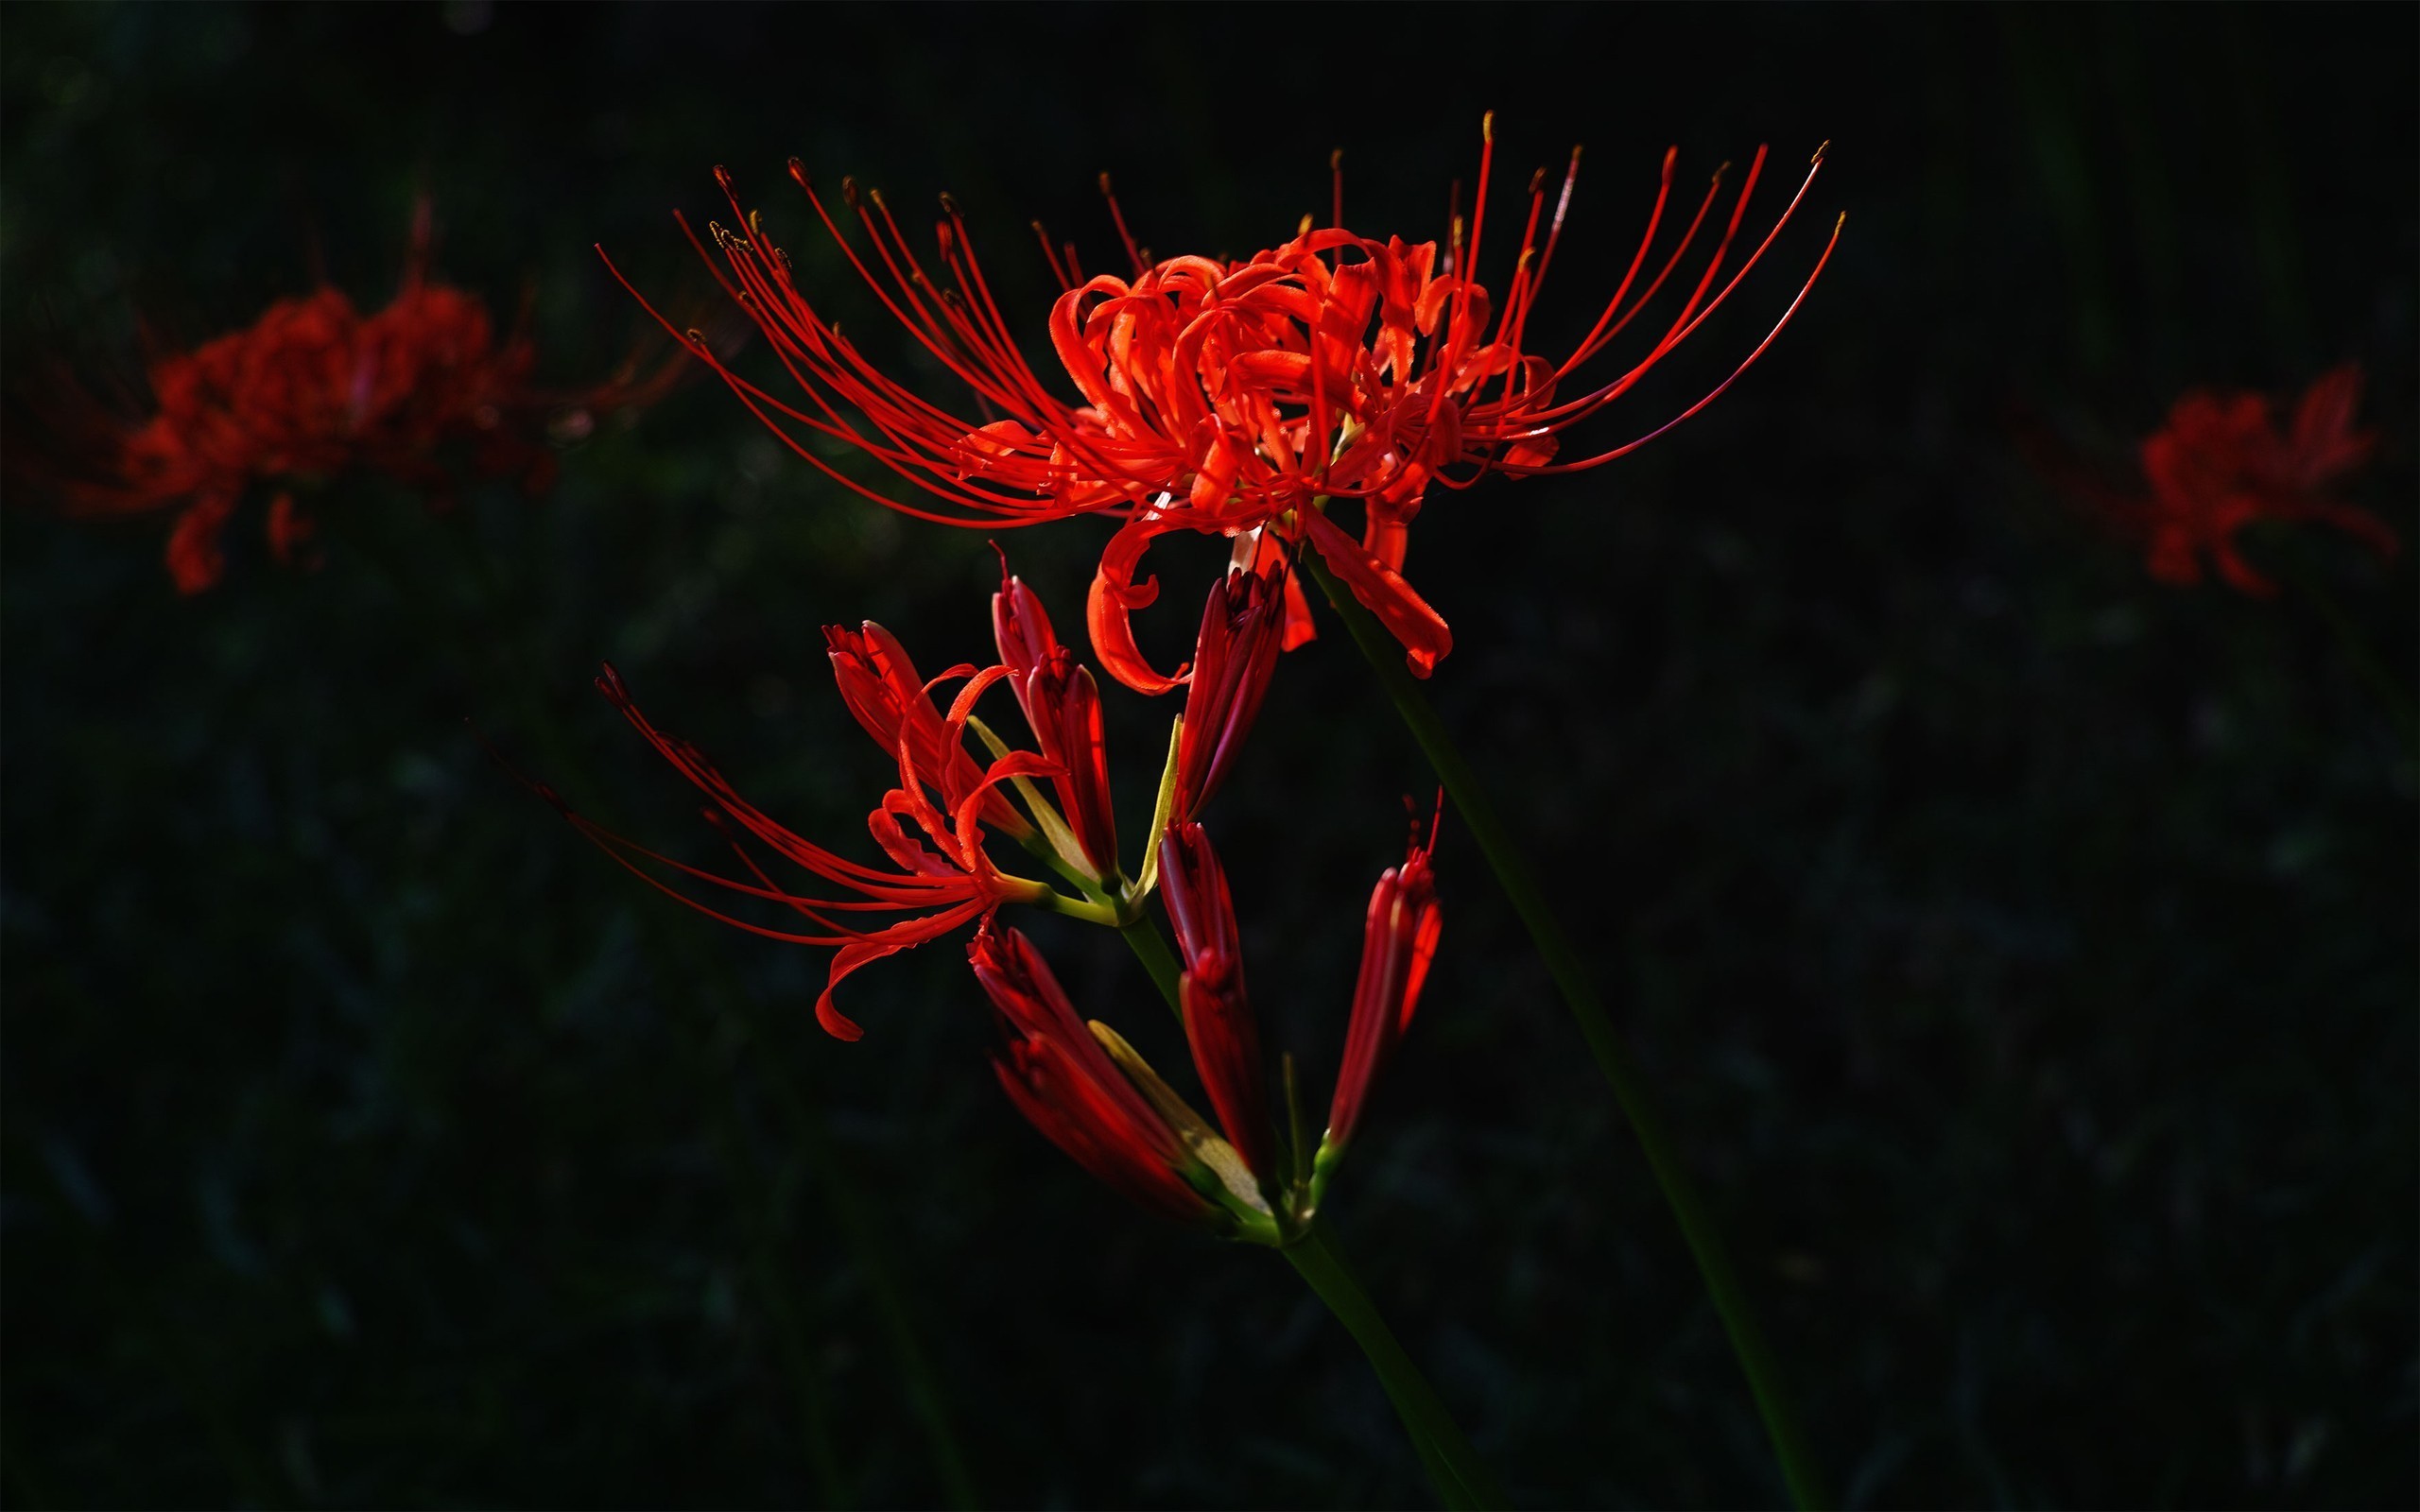 2560x1600 Red flower on dark background wallpapers and images - wallpapers .